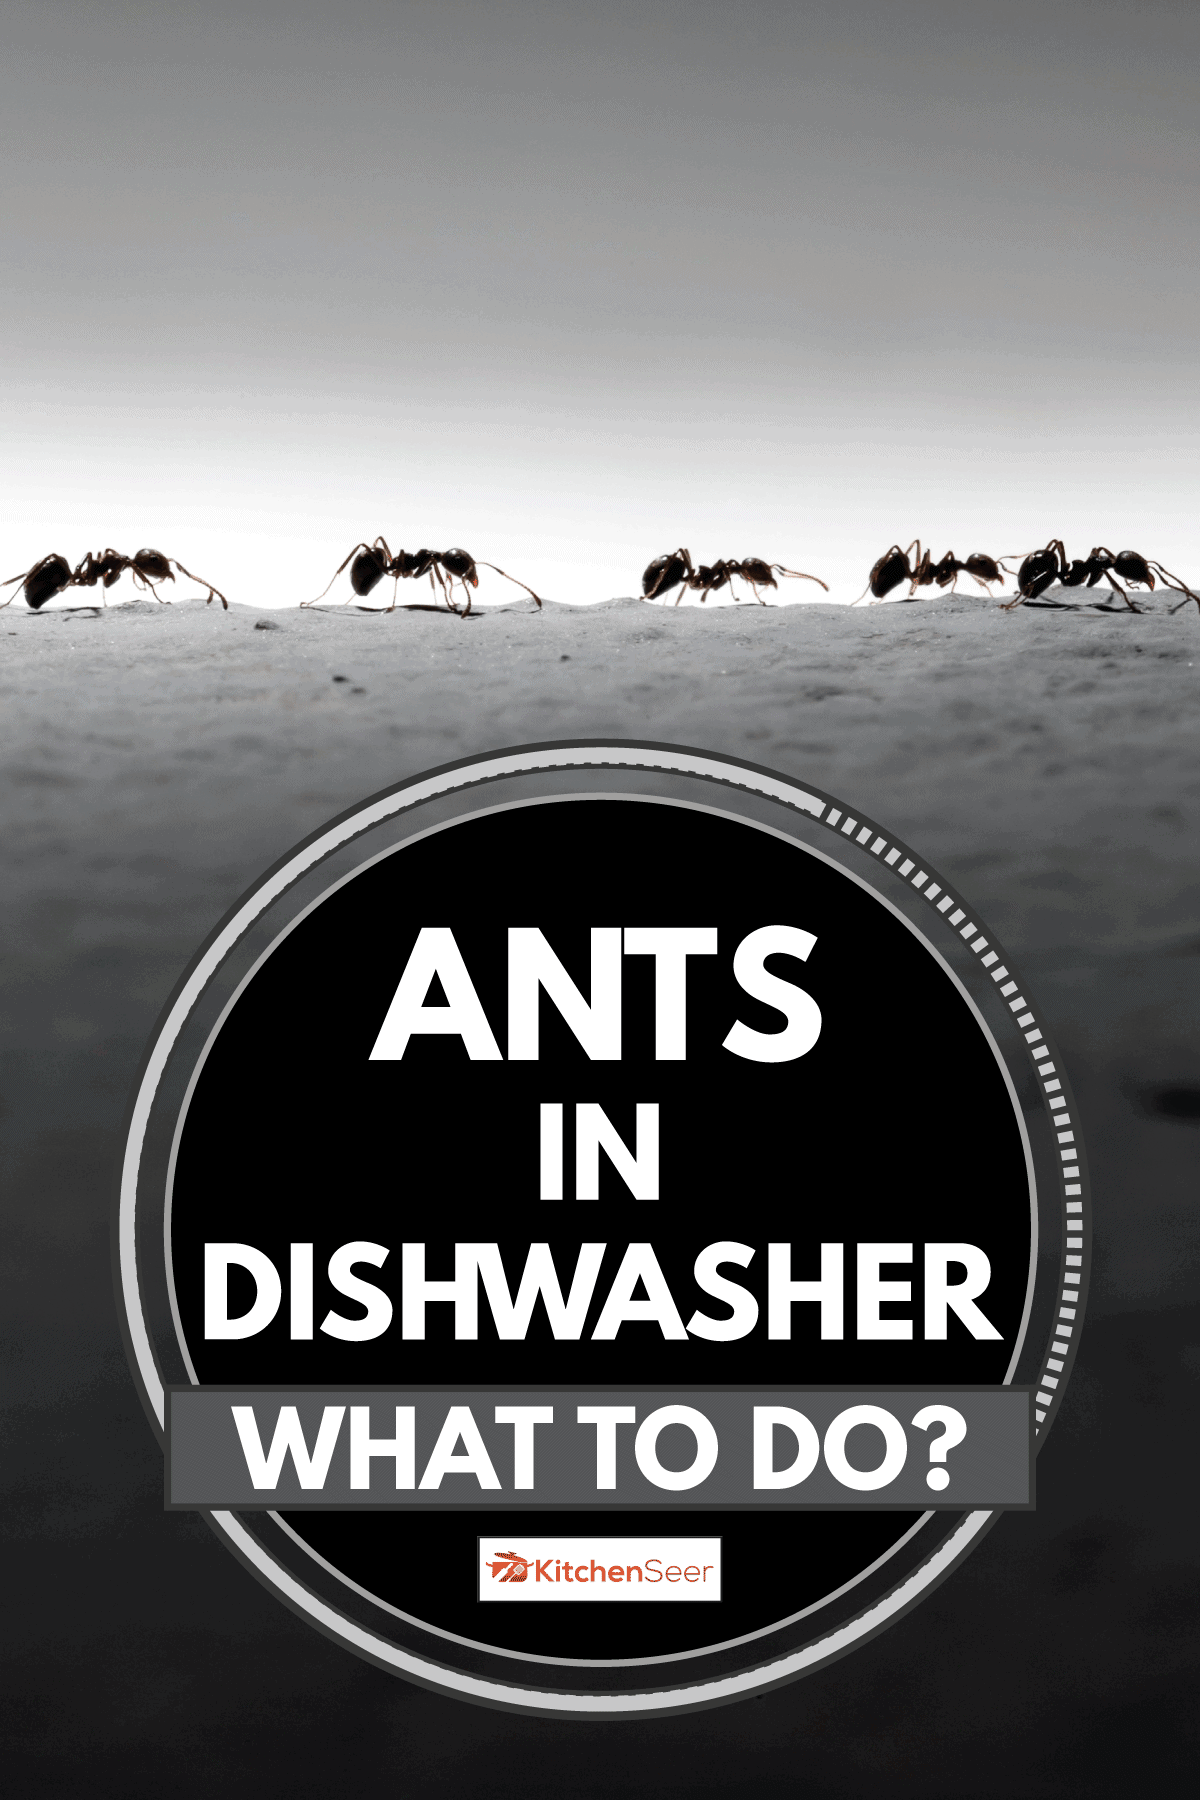 Close up photo of ants marching together, Ants In Dishwasher - What To Do?